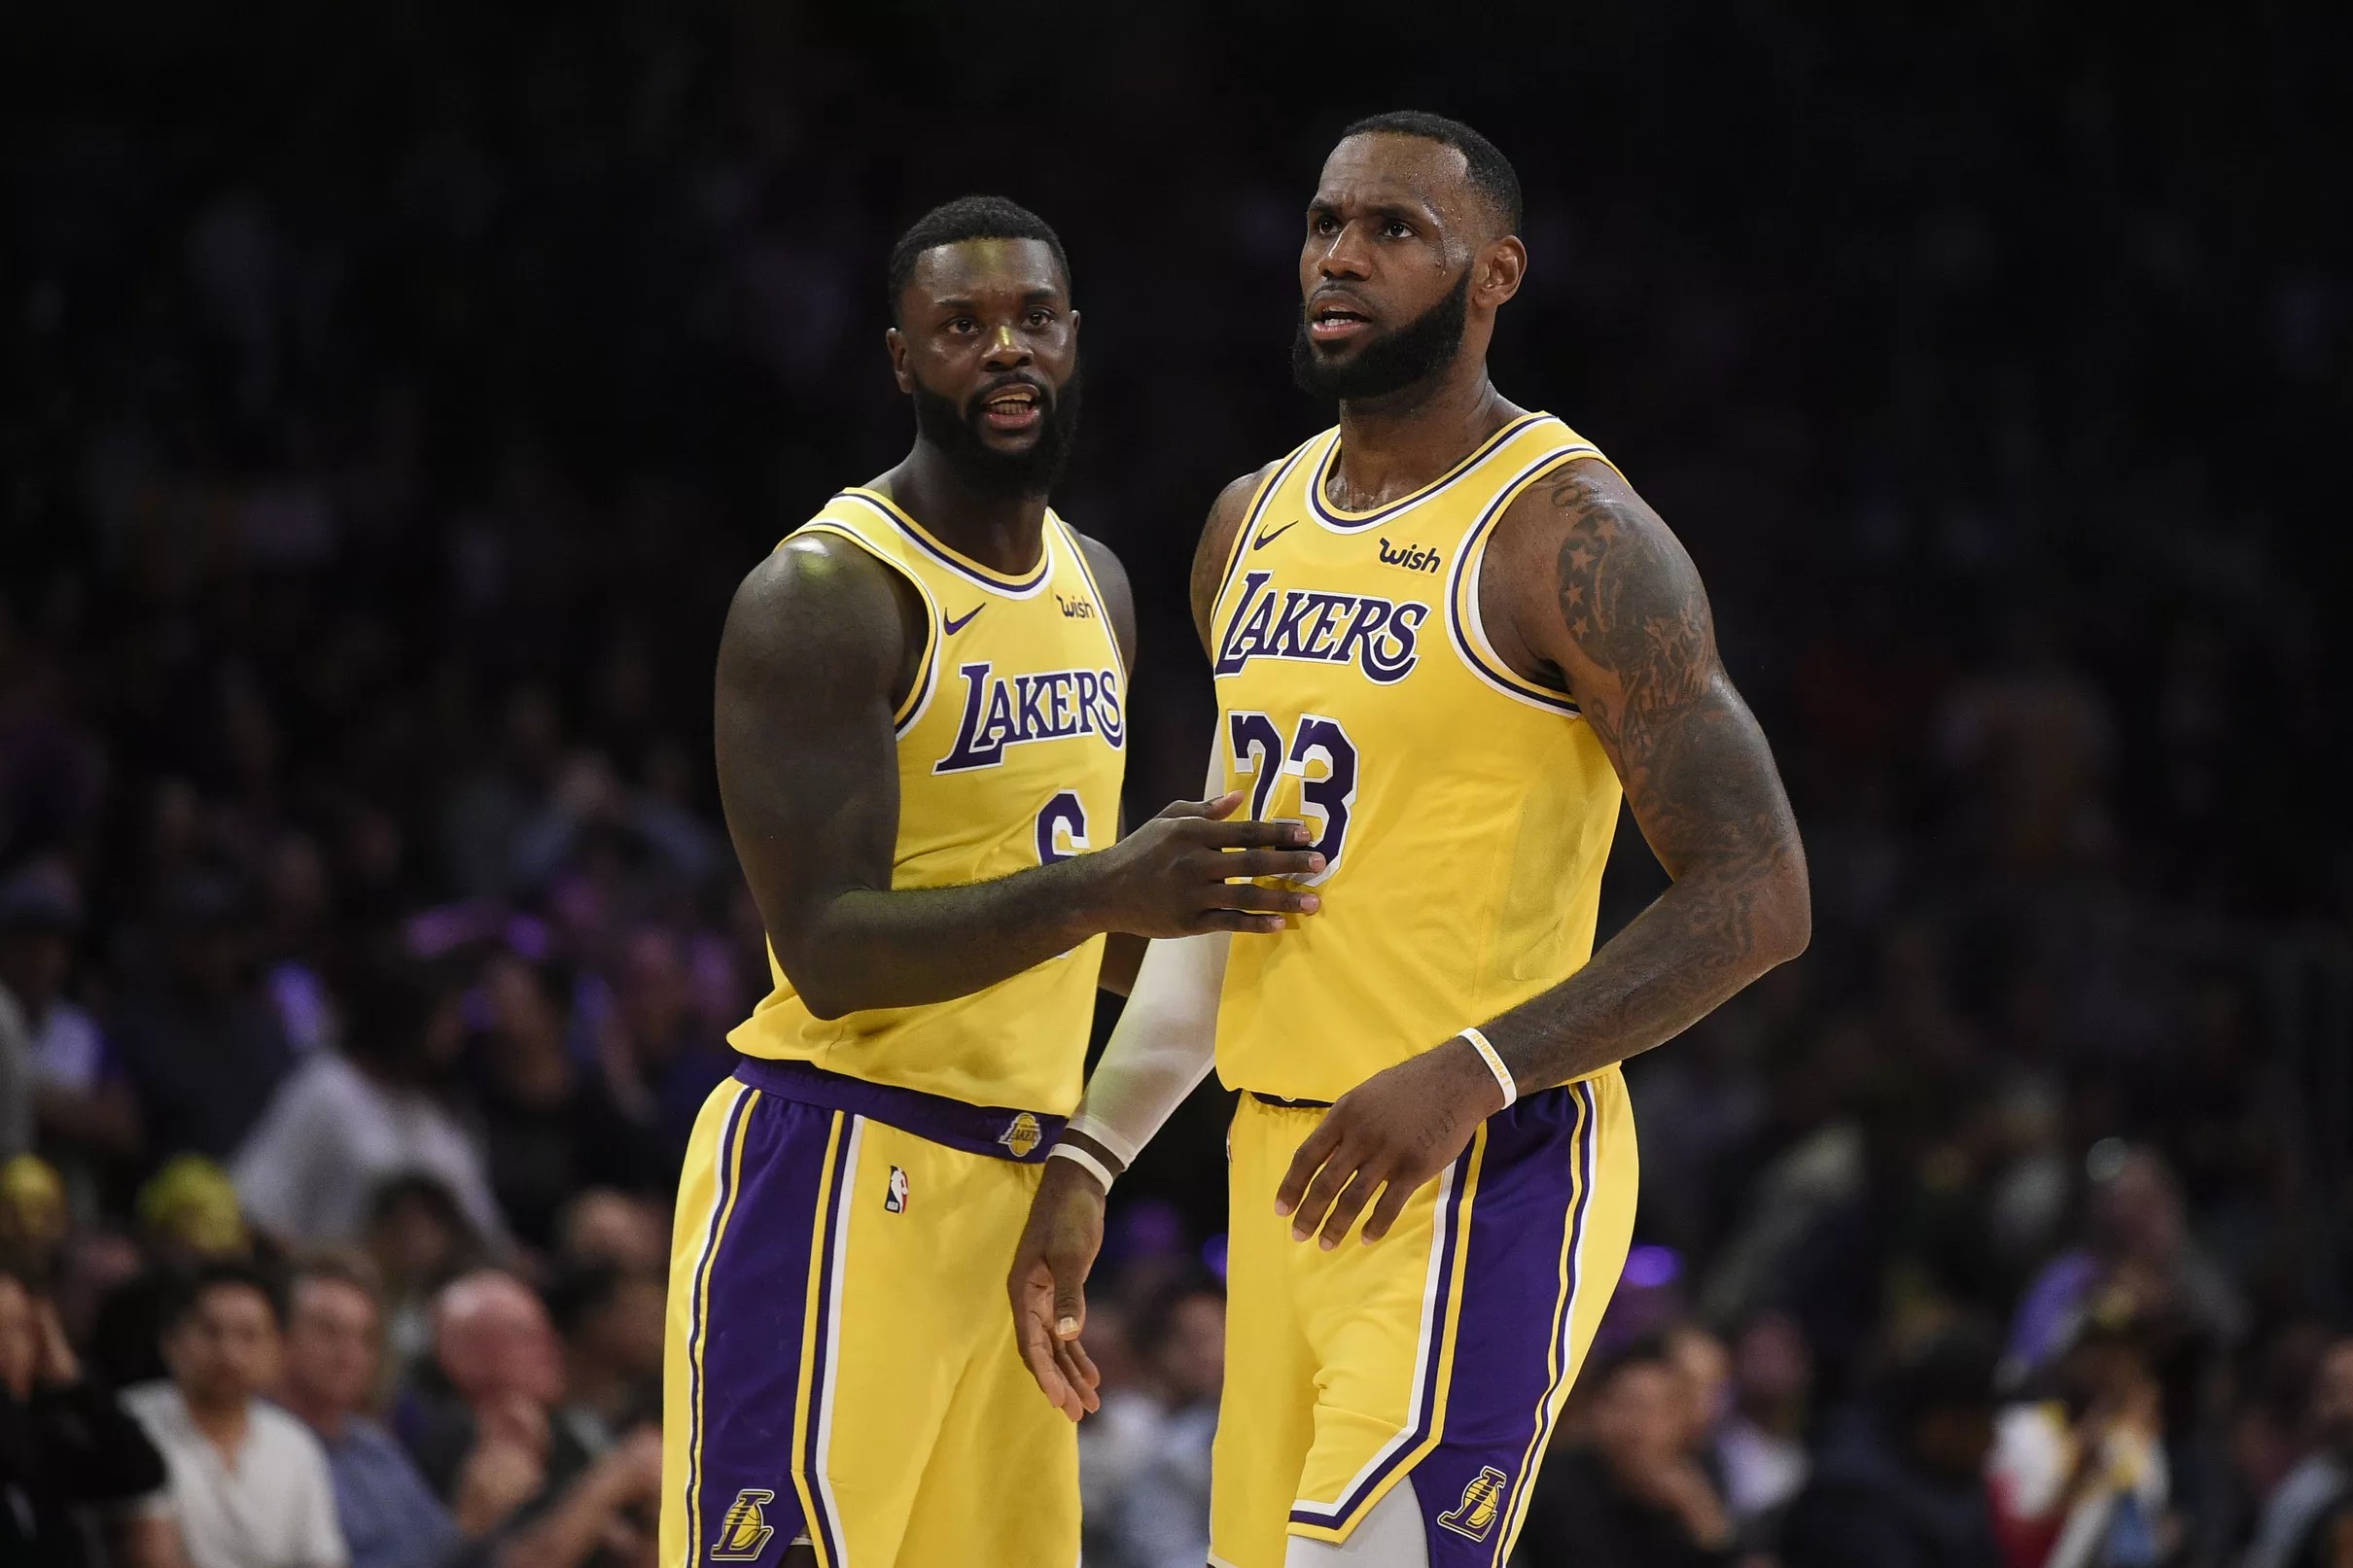 Lakers vs. Pacers: Game thread, lineups, TV info and more